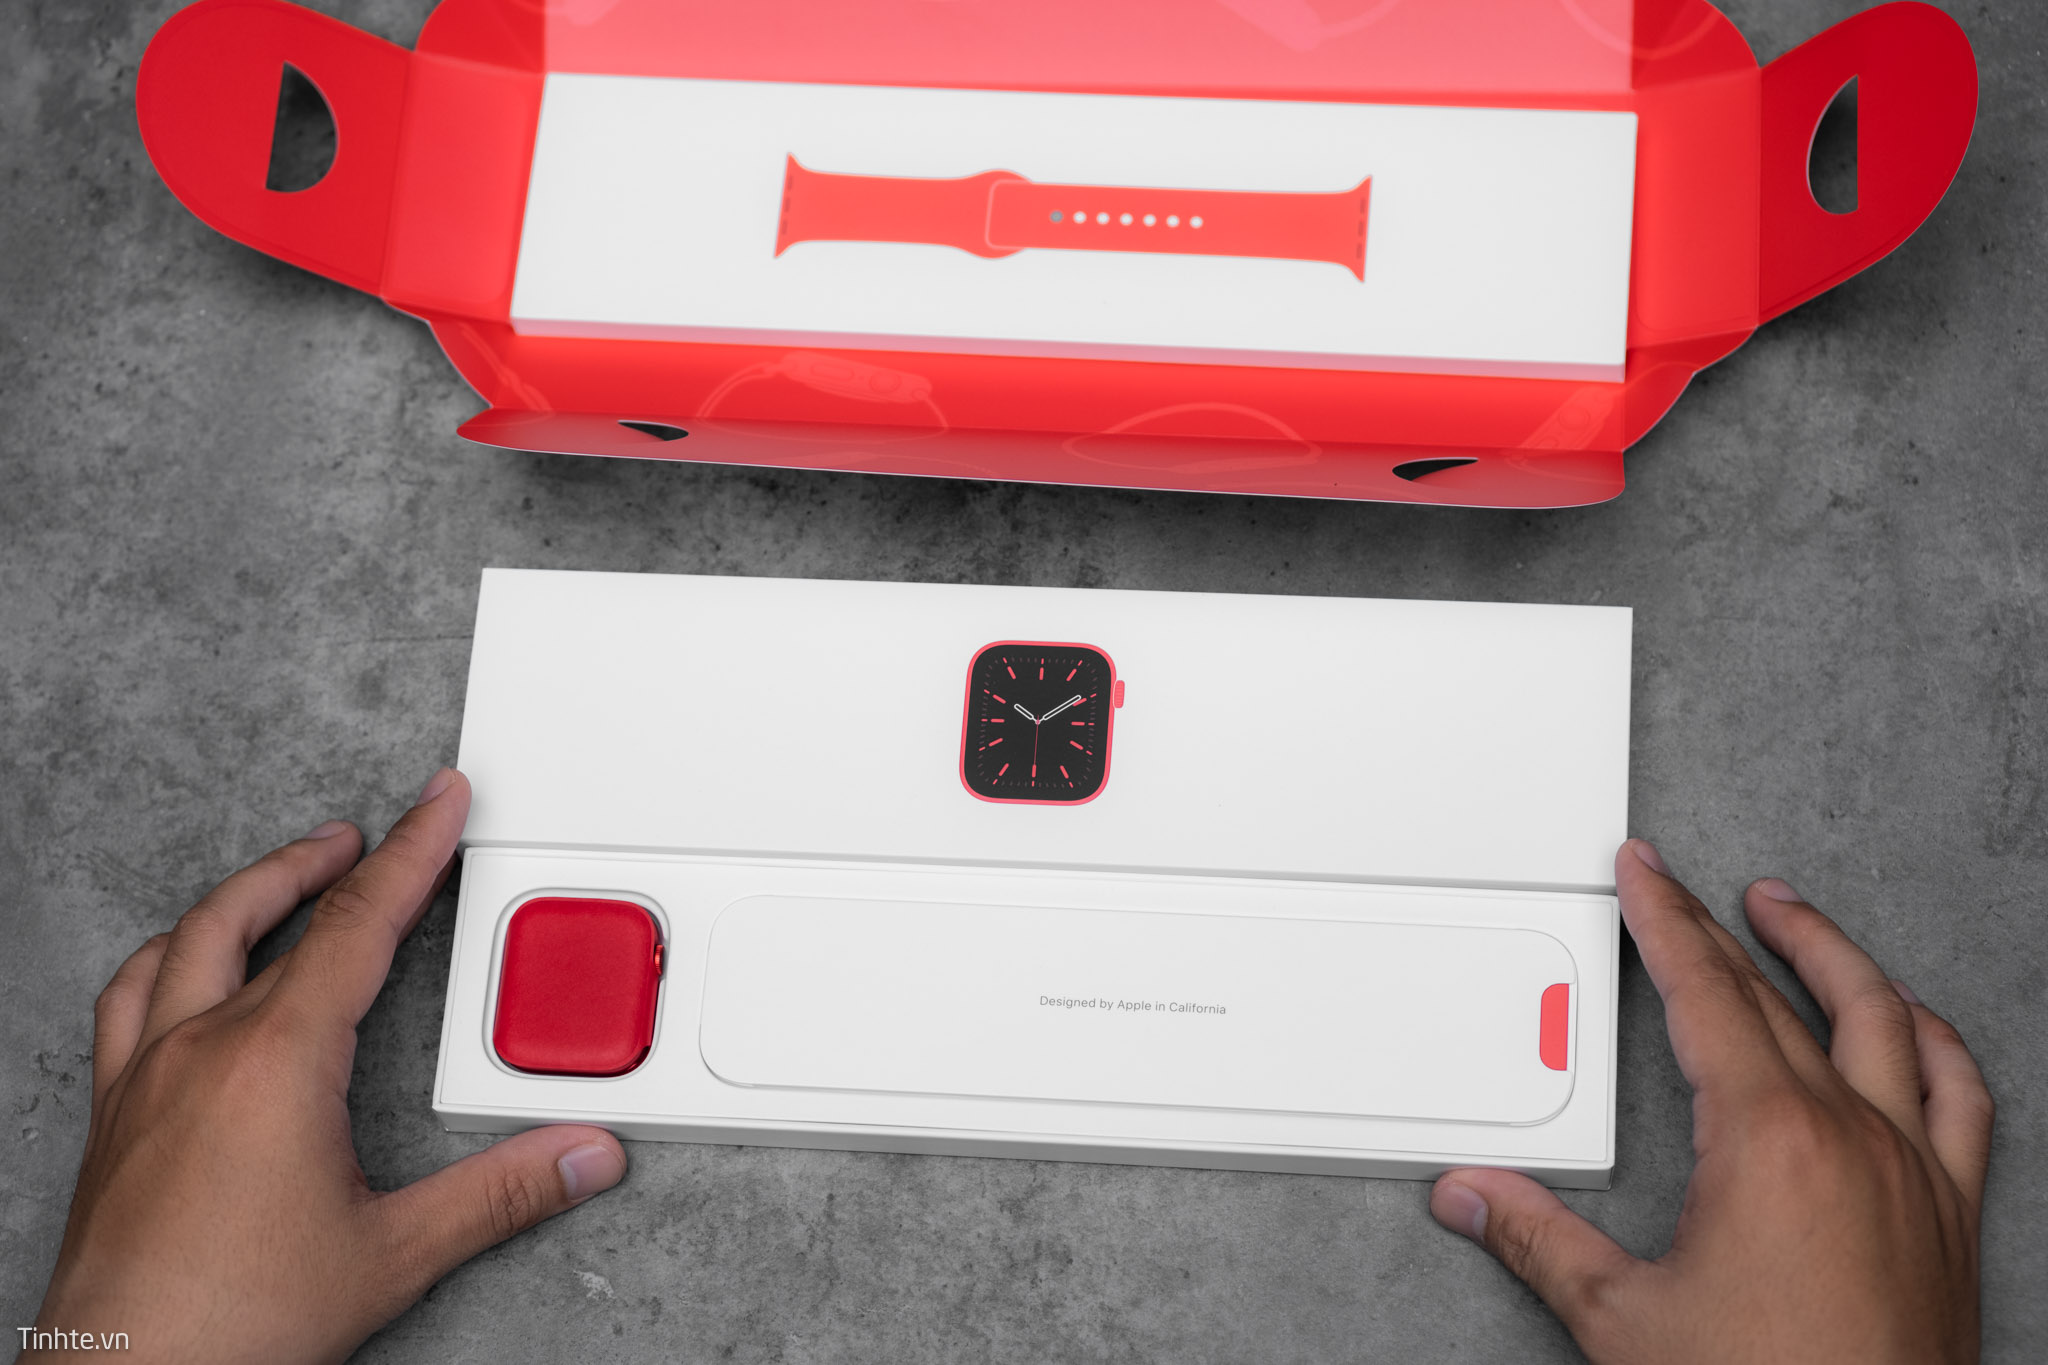 applewatch_red_product_tinhte_4.jpg